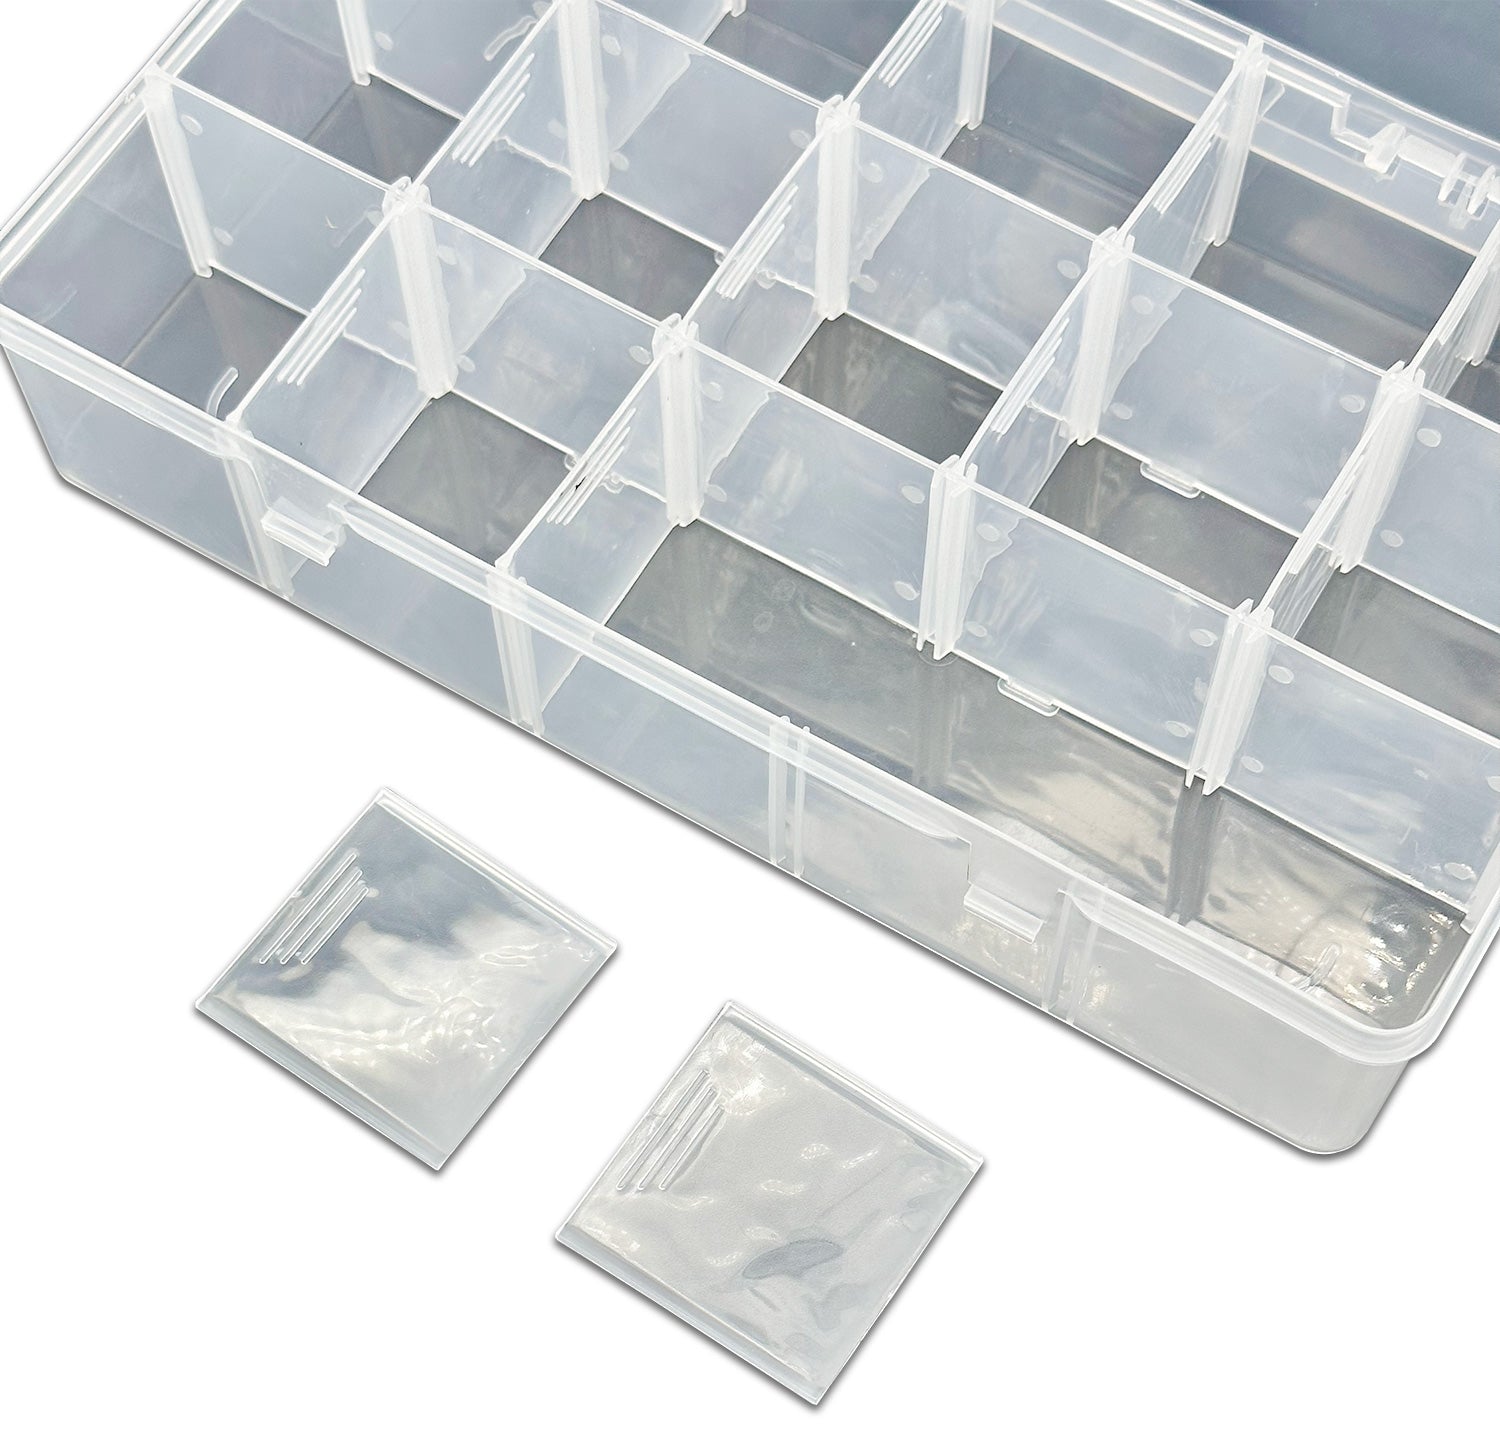 PAVITYAKSH 15 Grids Plastic Compartment Container, Clear Storage Organizer  Box Storage Box Price in India - Buy PAVITYAKSH 15 Grids Plastic Compartment  Container, Clear Storage Organizer Box Storage Box online at